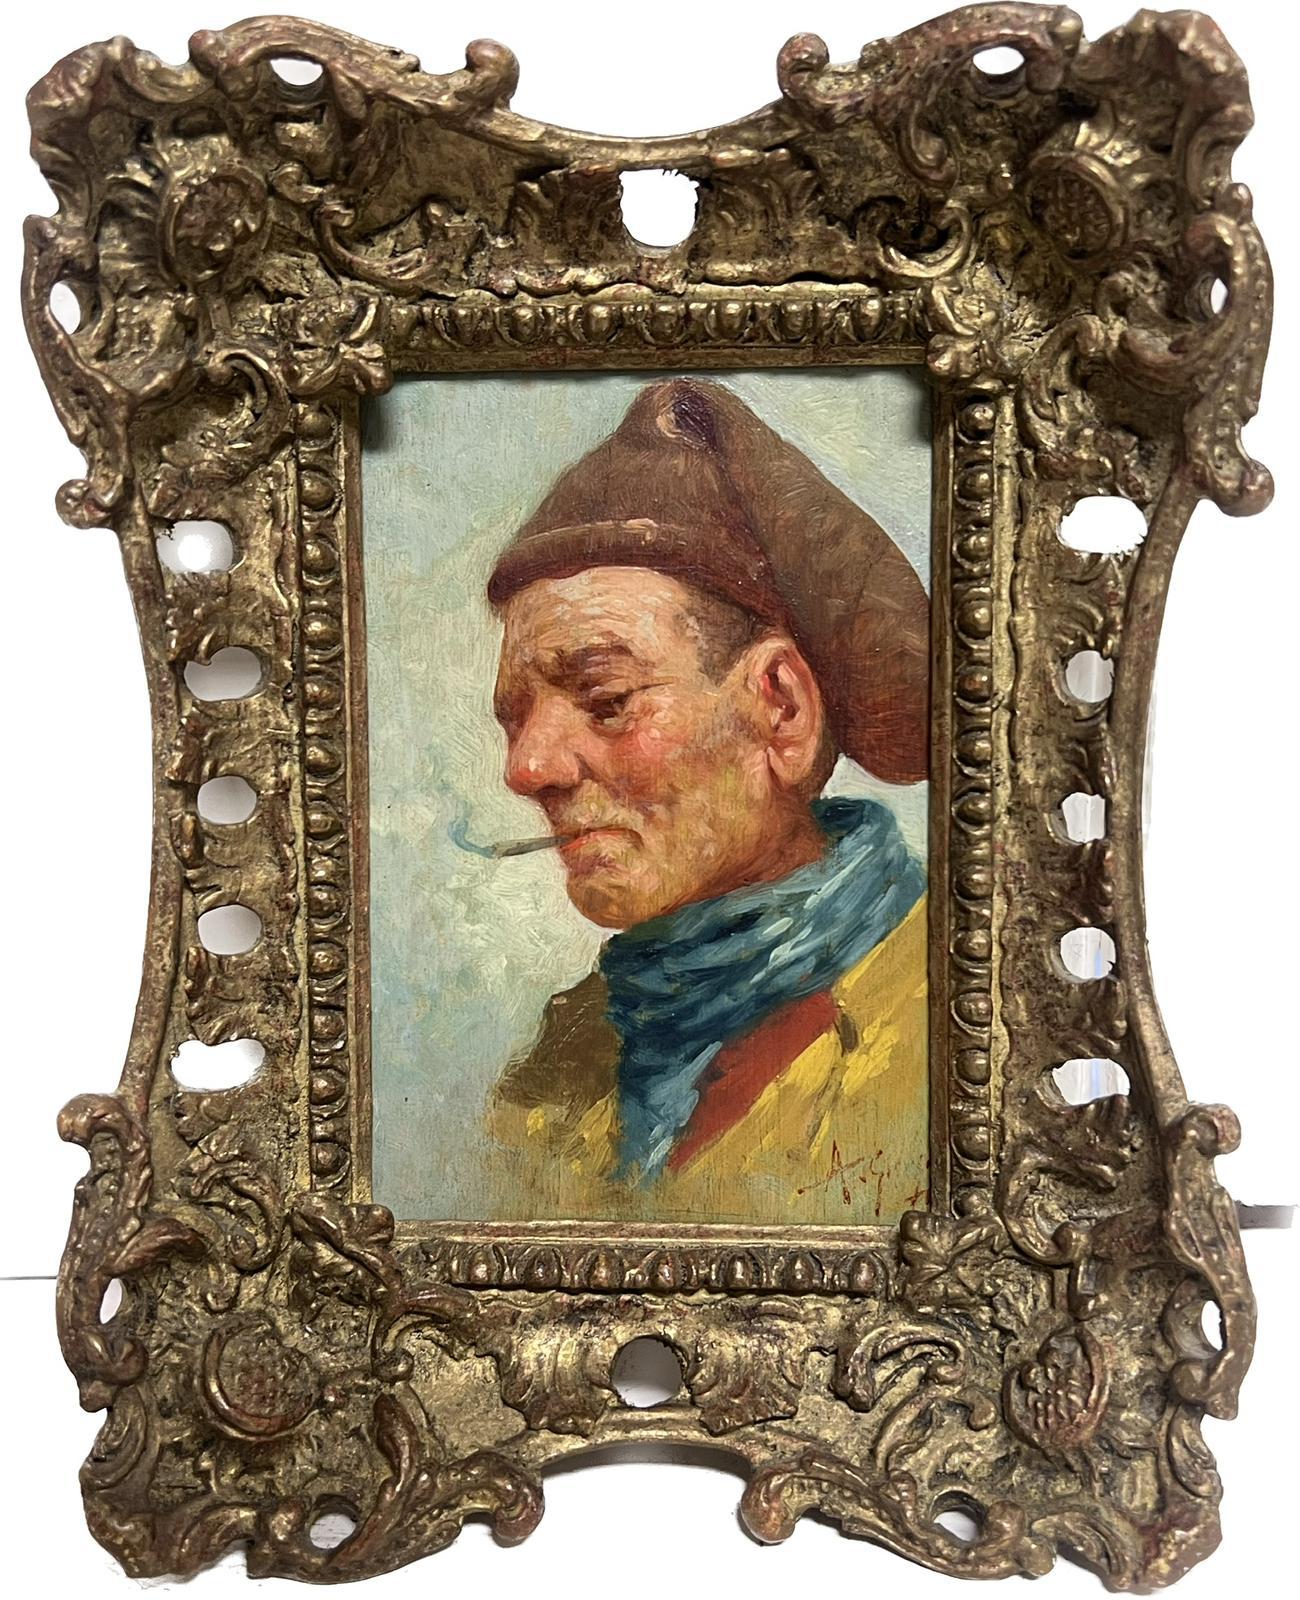 Neapolitan School Portrait Painting - The Pipe Smoker Late 19th Century Italian Signed Oil Painting Portrait of Man